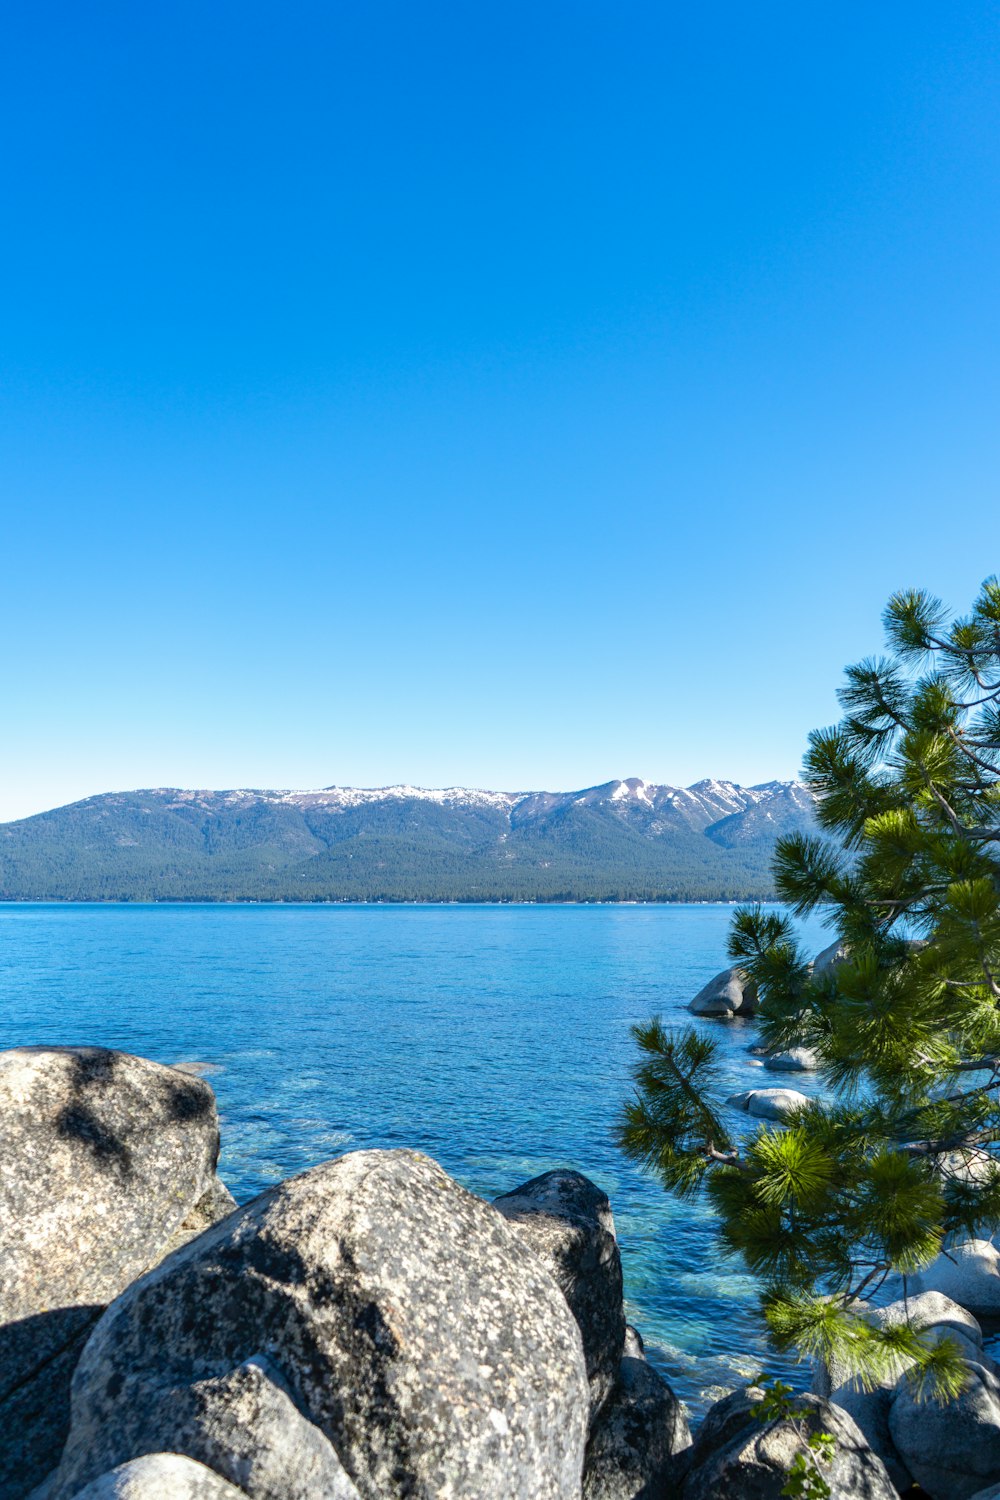 a view of a body of water with mountains in the background